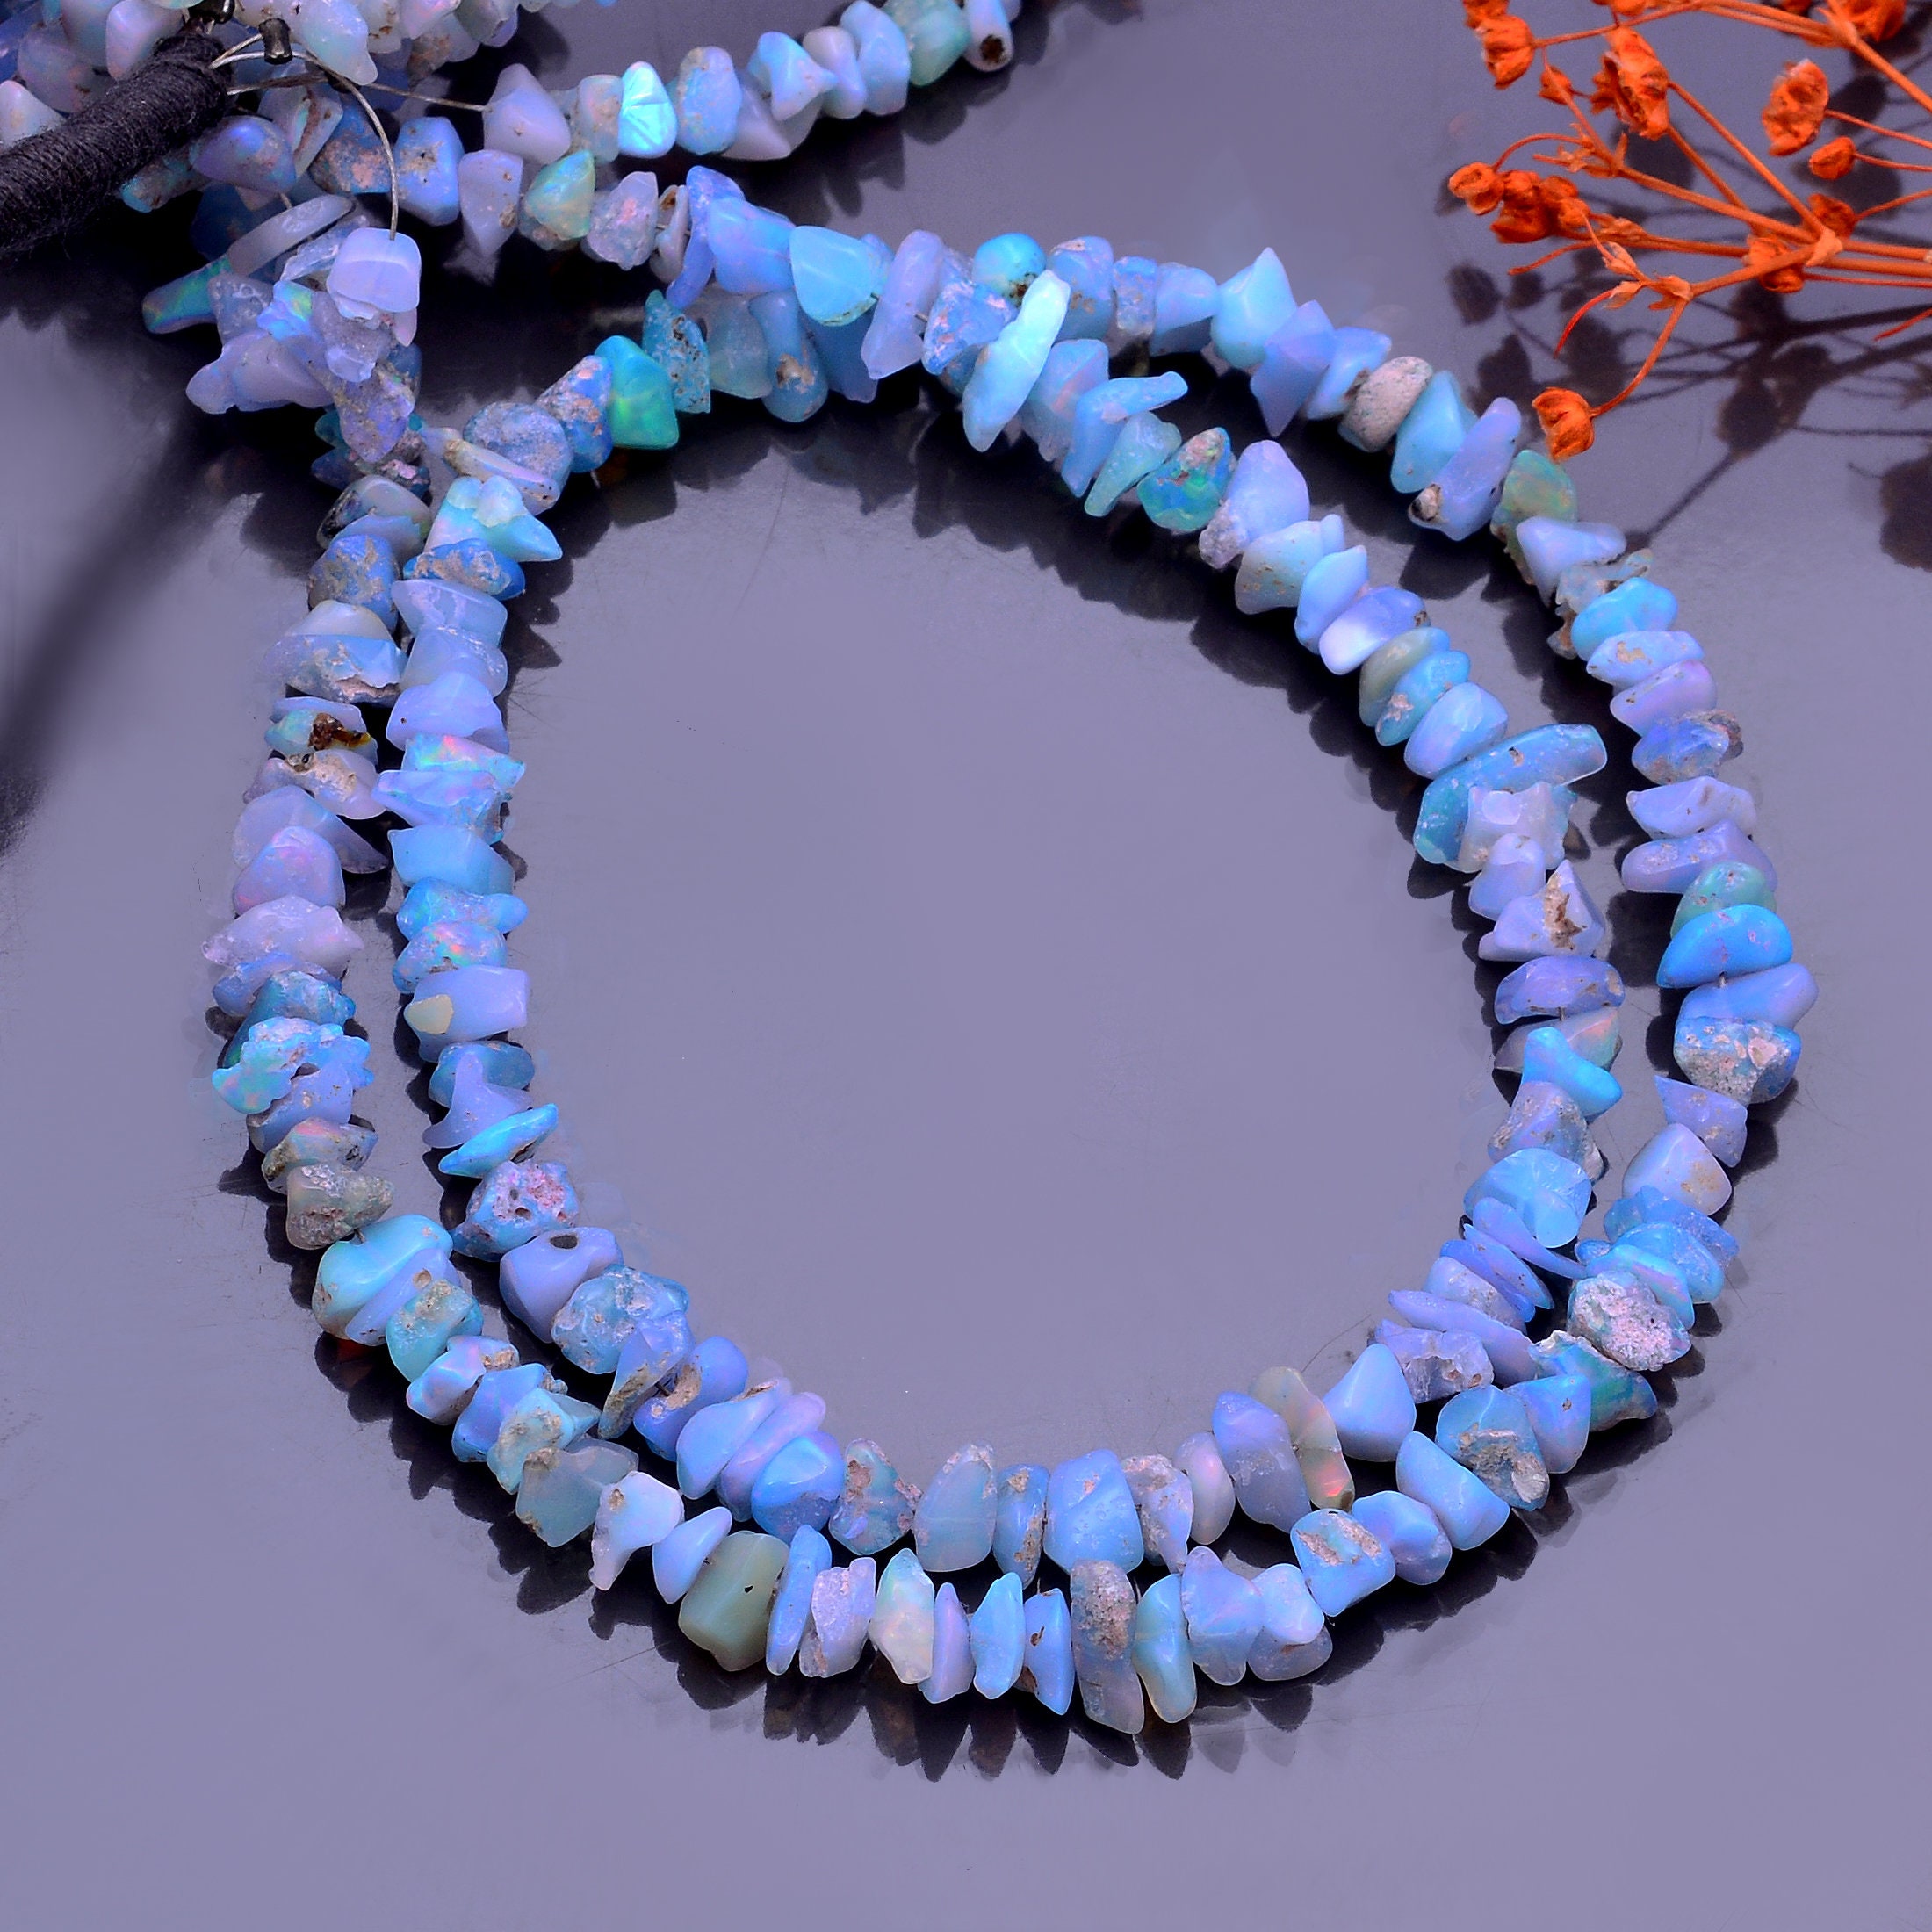 Natural Blue Opal Round 3mm Beads 4MM Loose B Bids For DIY Hand String  Accessories From Chenxun0809, $7.11